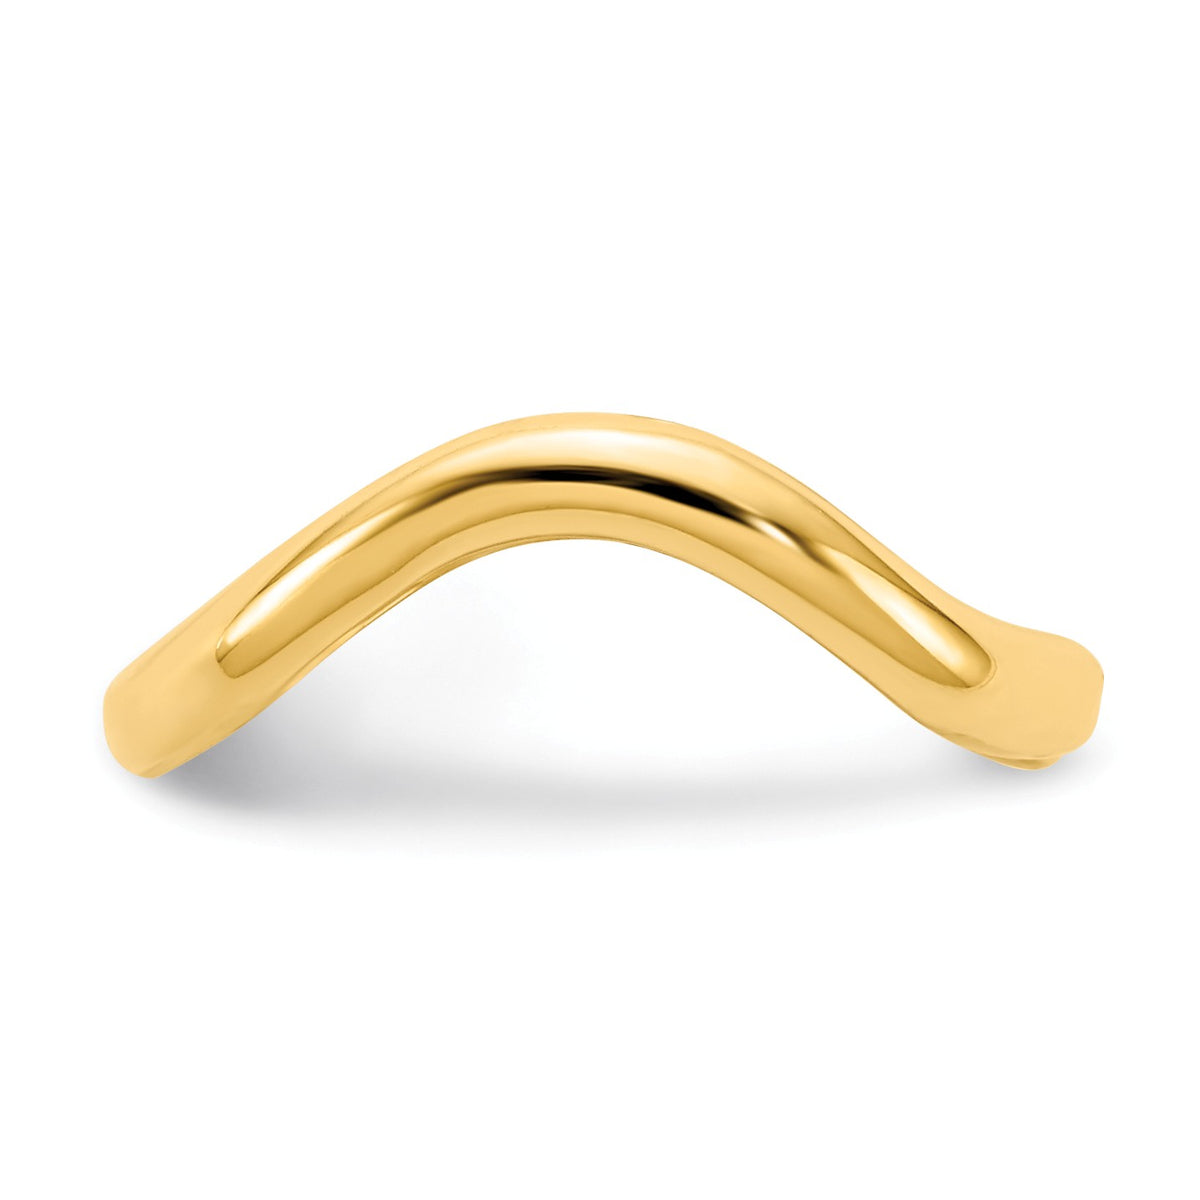 Alternate view of the Polished Curved Toe Ring in 14K Yellow Gold by The Black Bow Jewelry Co.